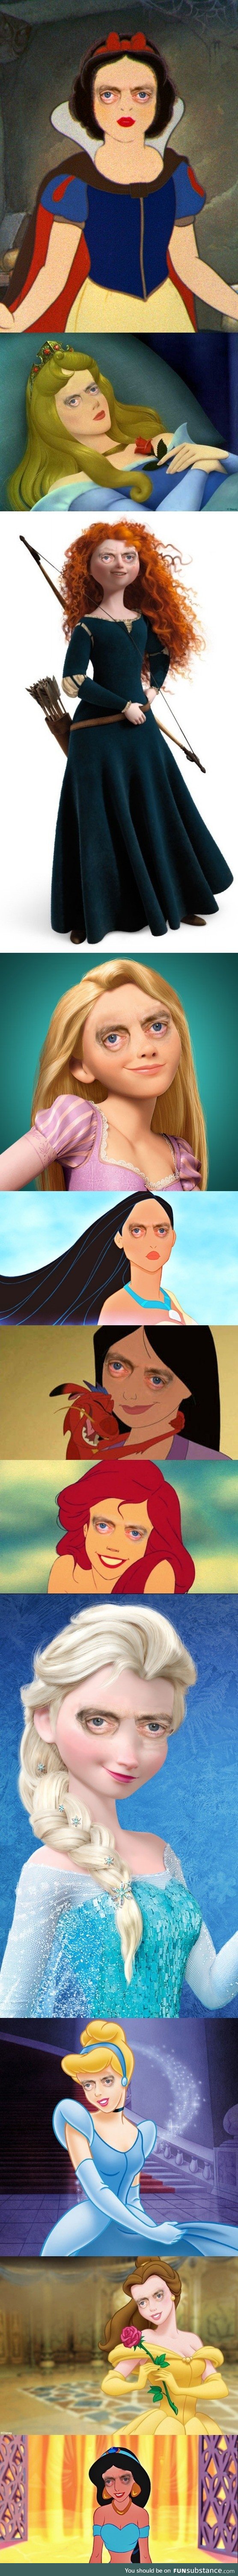 Disney Princesses but with Steve Buscemi's eyes